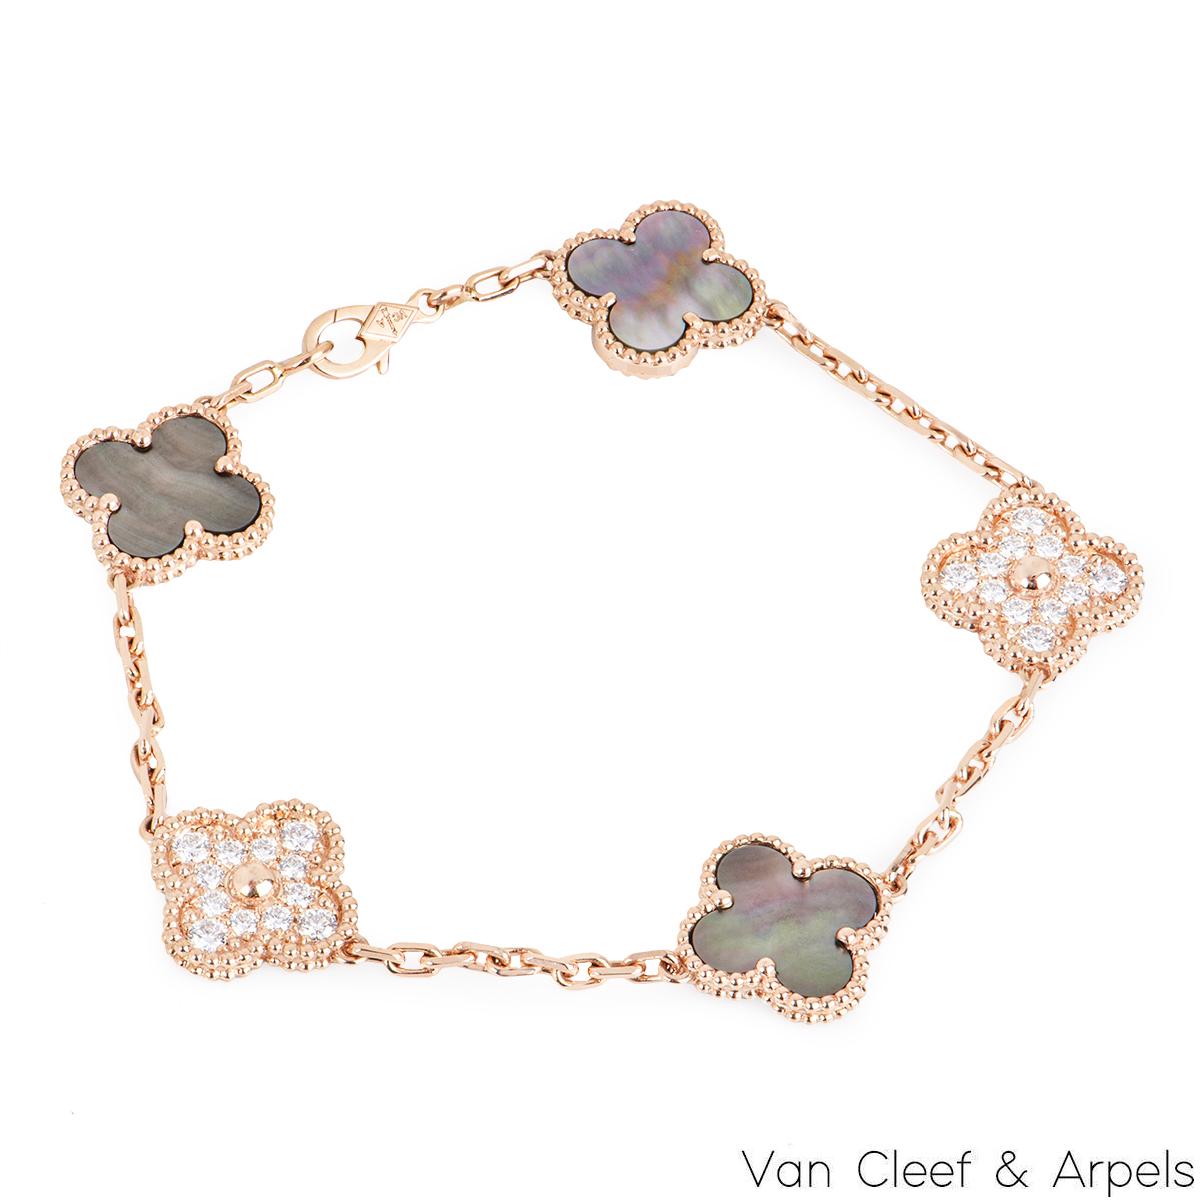 A timeless 18k rose gold bracelet from the Vintage Alhambra collection by Van Cleef and Arpels. The bracelet is made up of 5 iconic clover motifs, three are set with grey mother of pearl inlays and two are pave set with round brilliant cut diamonds